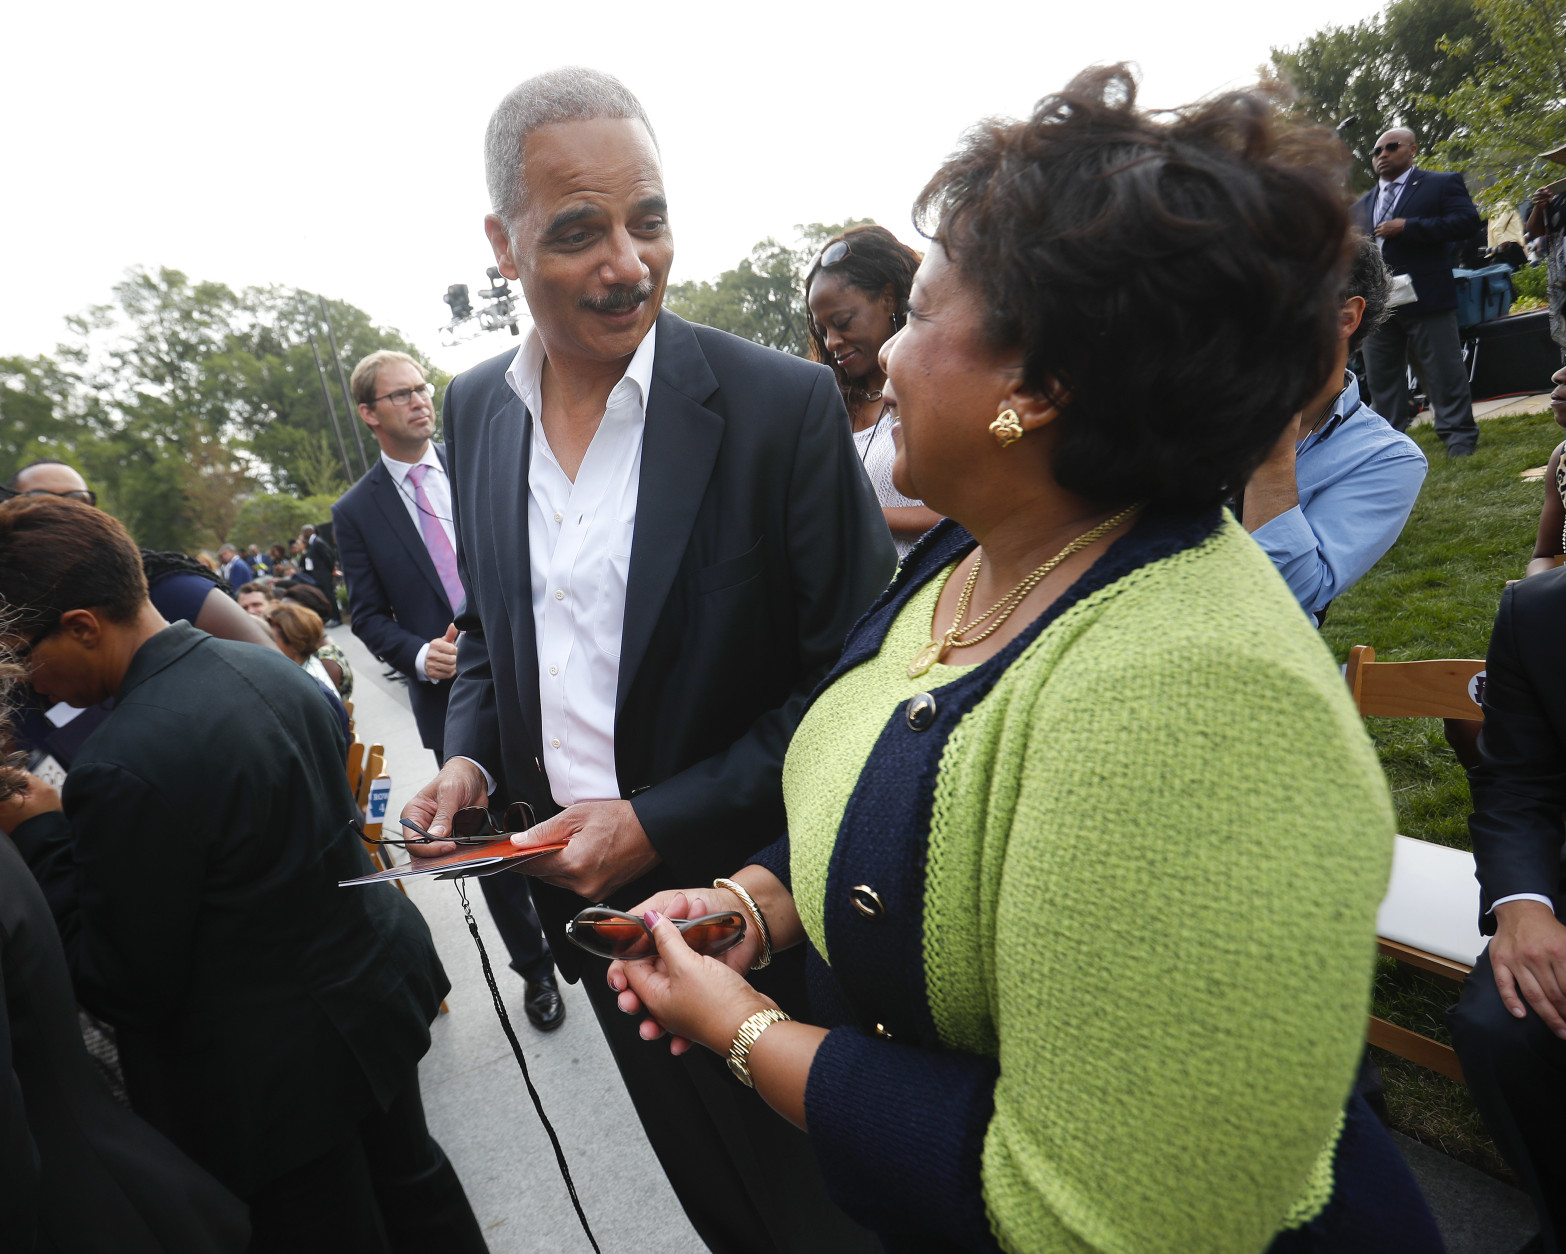 Former Attorney General Eric Holder, left, talks with current Attorney General Loretta Lynch as they arrive for the dedication ceremony of the Smithsonian Museum of African American History and Culture on the National Mall in Washington, Saturday, Sept. 24, 2016. (AP Photo/Pablo Martinez Monsivais)